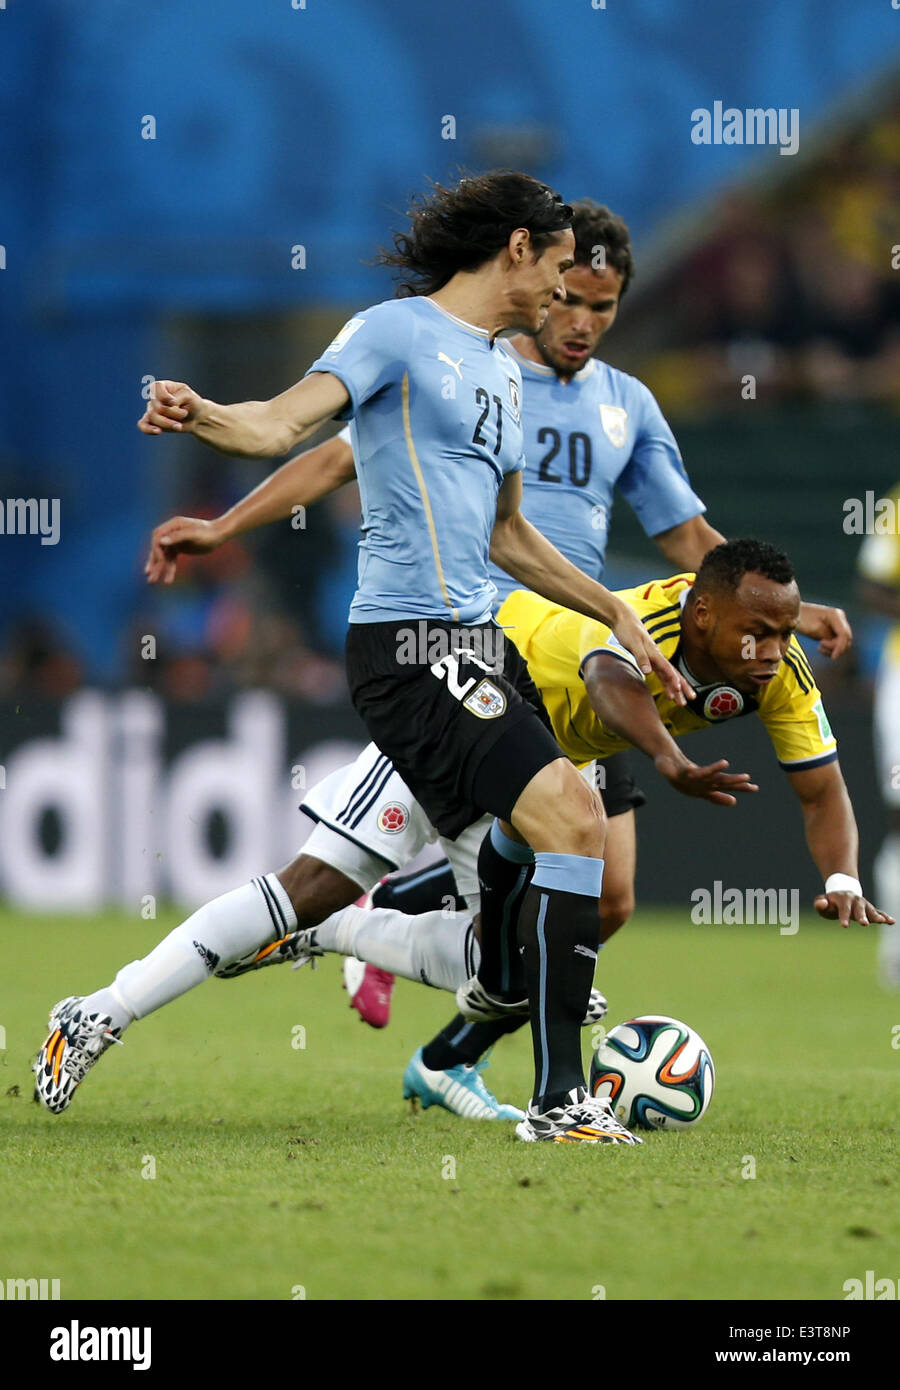 Rio De Janeiro, Brazil. 28th June, 2014. Colombia's Juan Zuniga (C) falls down in a competition with Uruguay's Edinson Cavani (front) and Alvaro Gonzalez during a Round of 16 match between Colombia and Uruguay of 2014 FIFA World Cup at the Estadio do Maracana Stadium in Rio de Janeiro, Brazil, on June 28, 2014. Credit:  Wang Lili/Xinhua/Alamy Live News Stock Photo